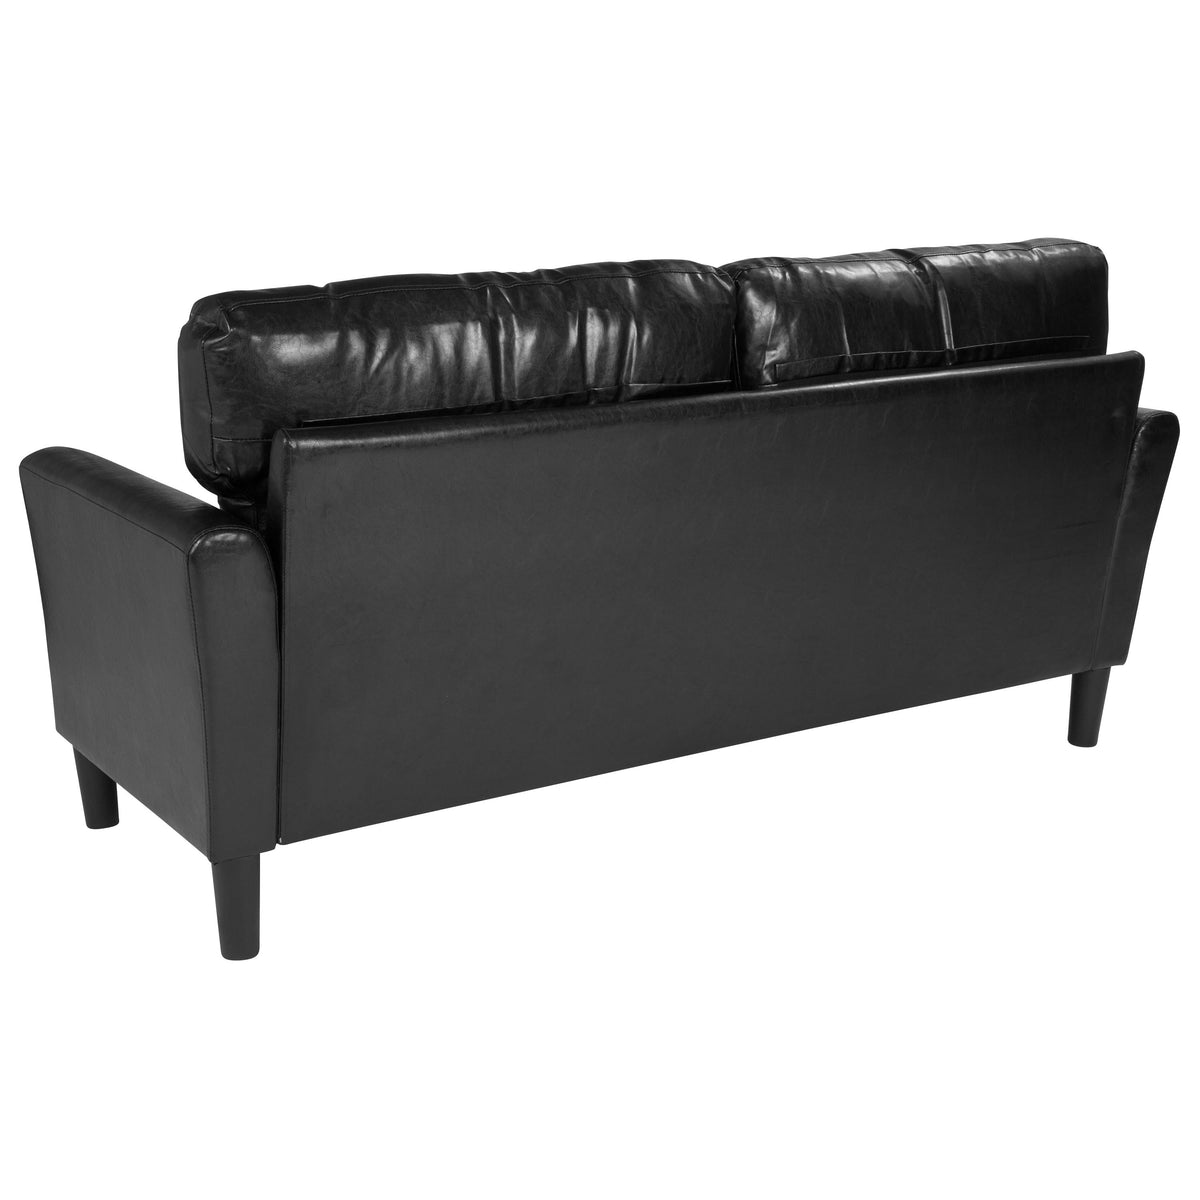 Black LeatherSoft |#| Upholstered Living Room Sofa with Tailored Arms in Black LeatherSoft